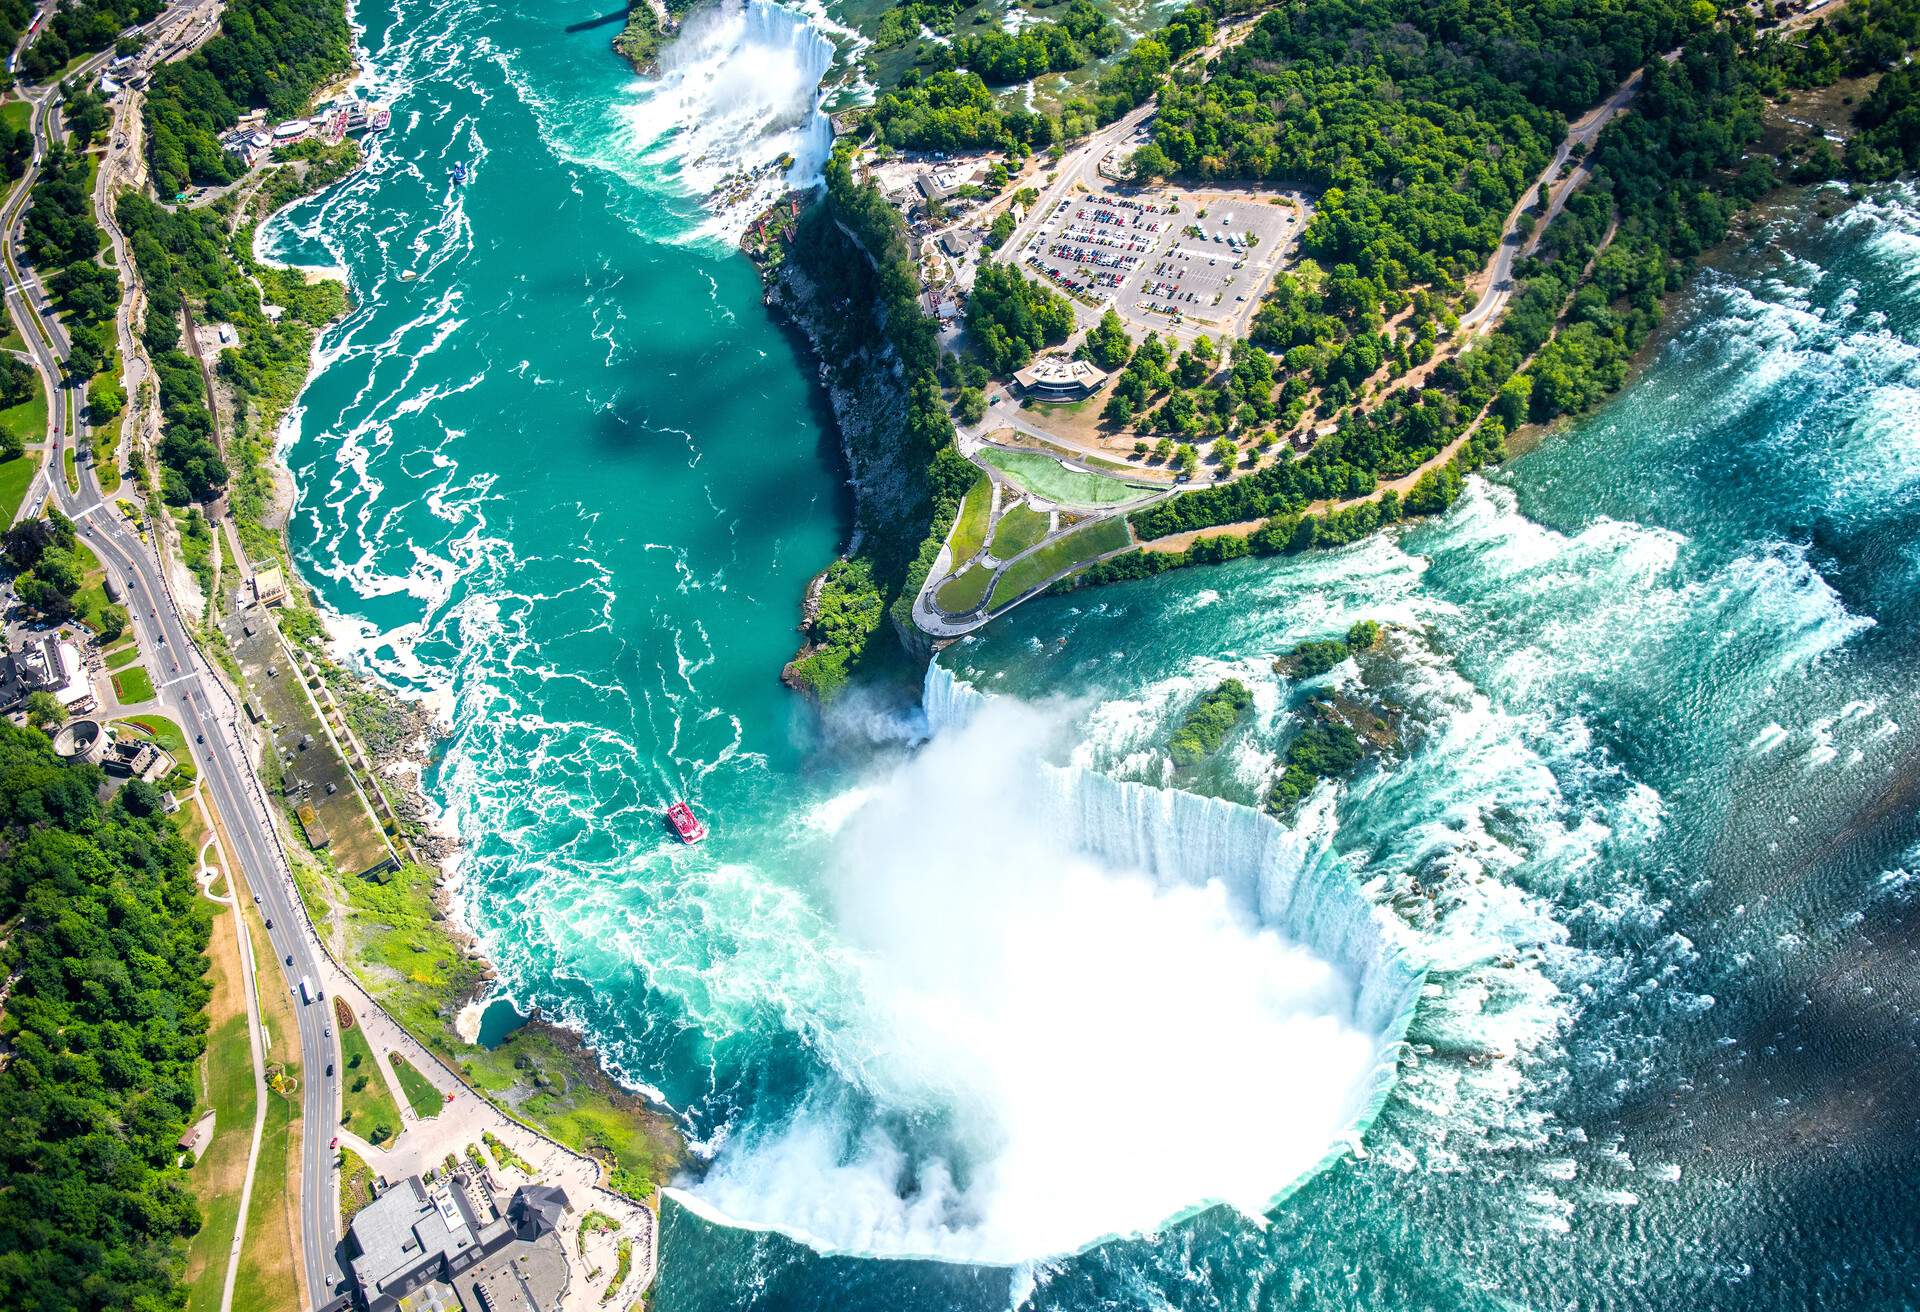 Niagara Falls Aerial View from helicopter, Canadian Falls, Canada; Shutterstock ID 546768265